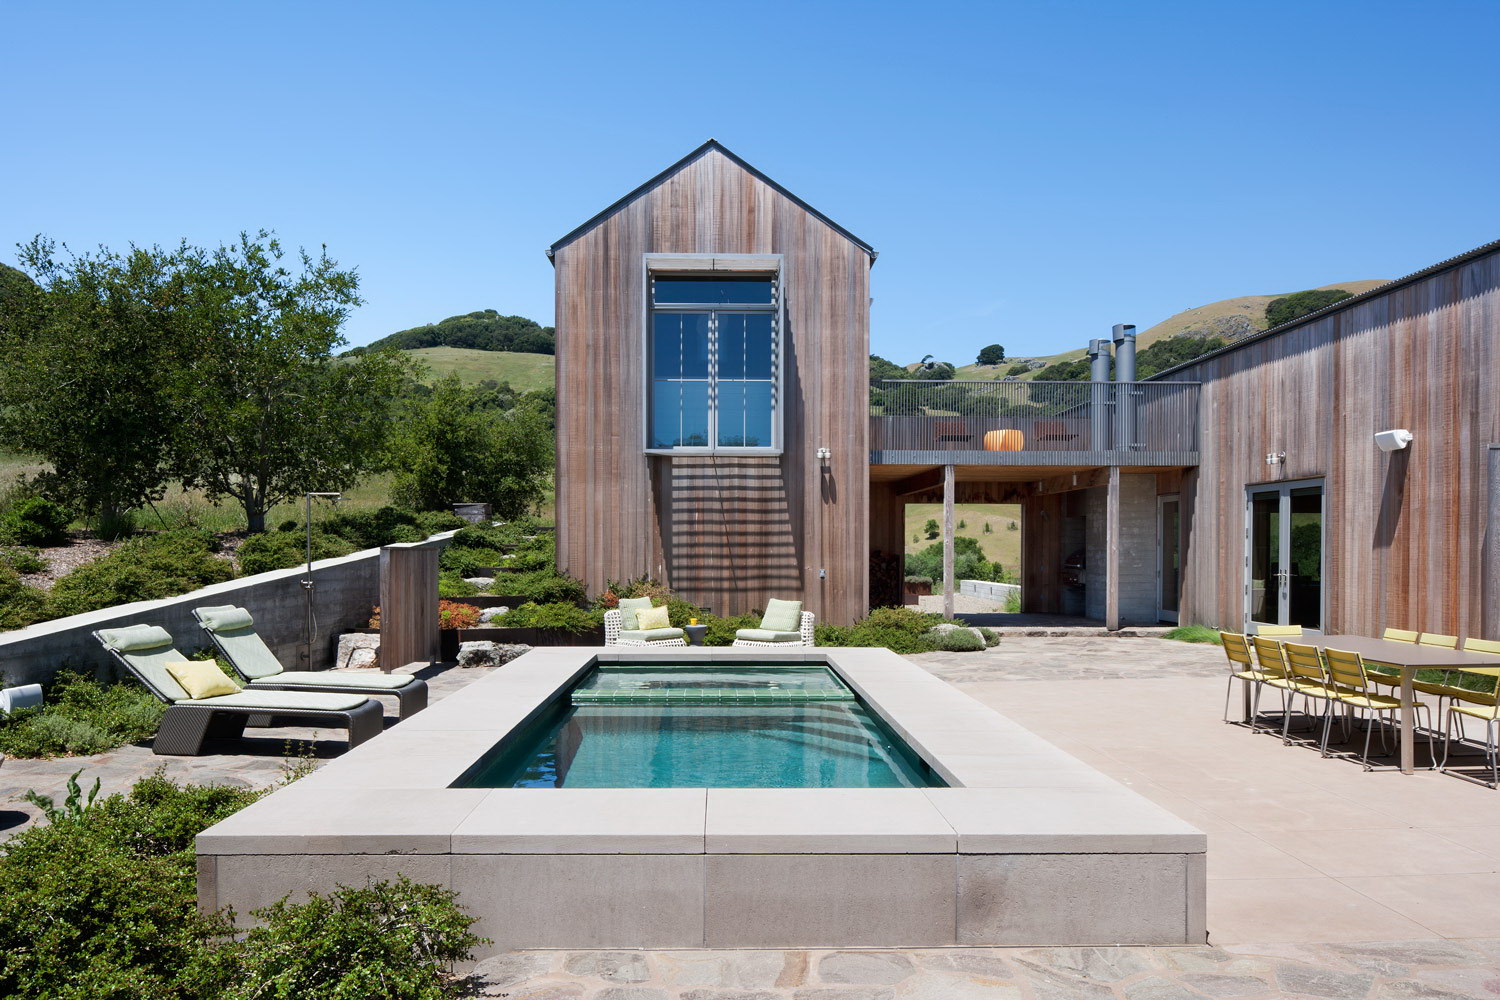 West Marin Ranch by Turnbull Griffin Haesloop Architects and Lotus Bleu Home Décor & Interior Design